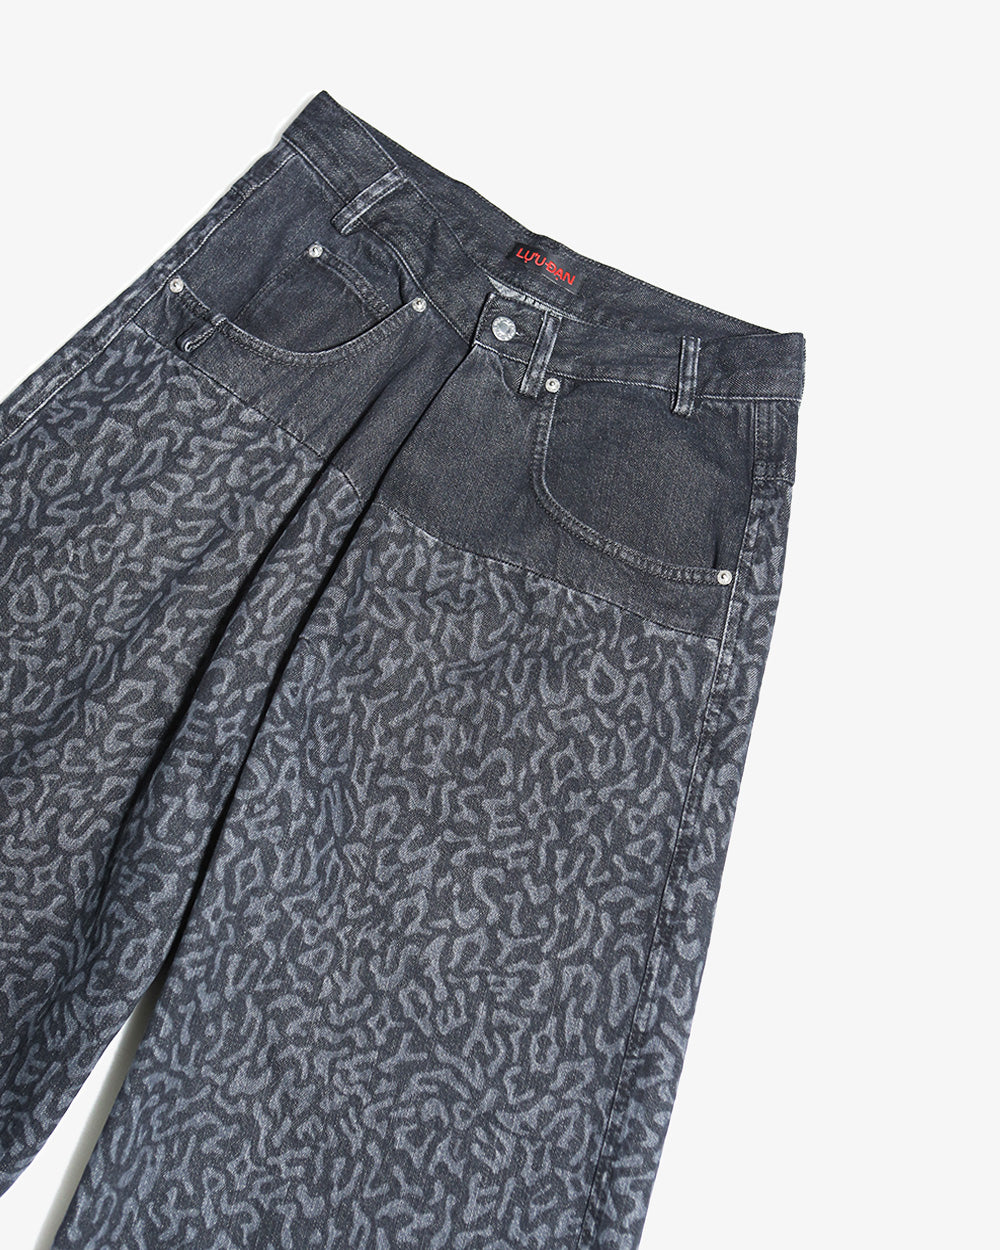 Panther Camo Pleated Front Jeans